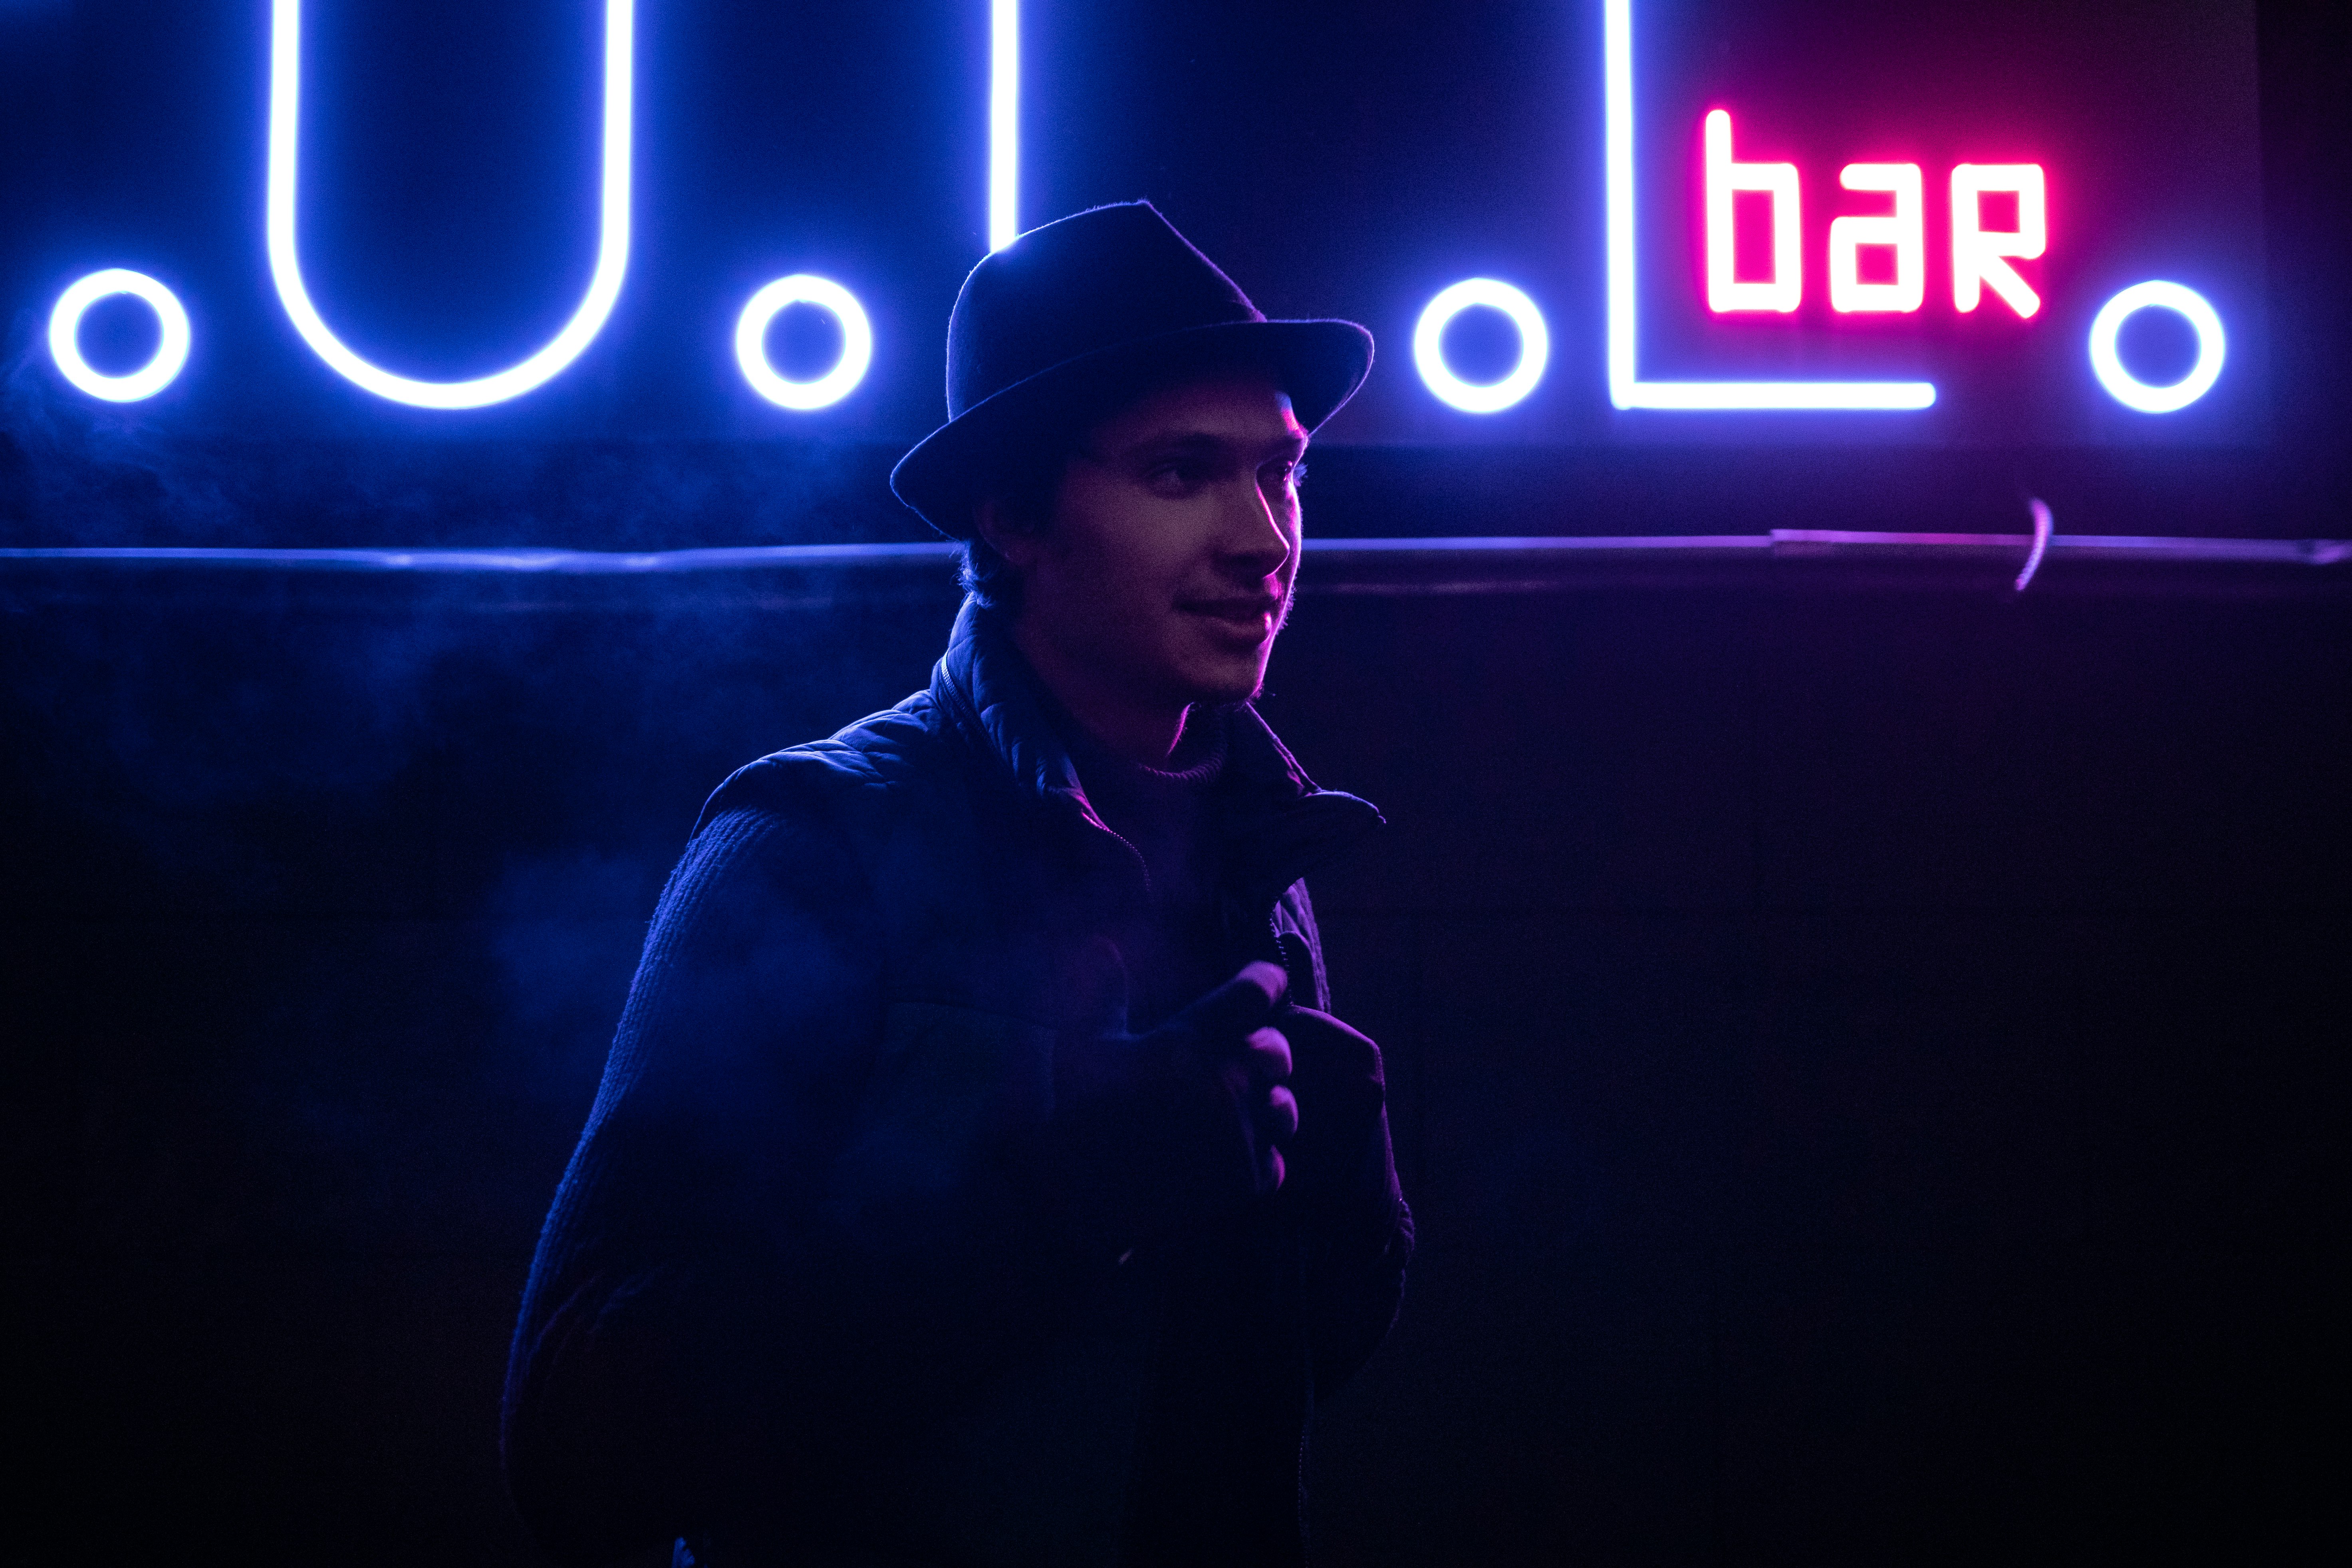 man in black leather jacket wearing black hat standing near blue and red open neon signage